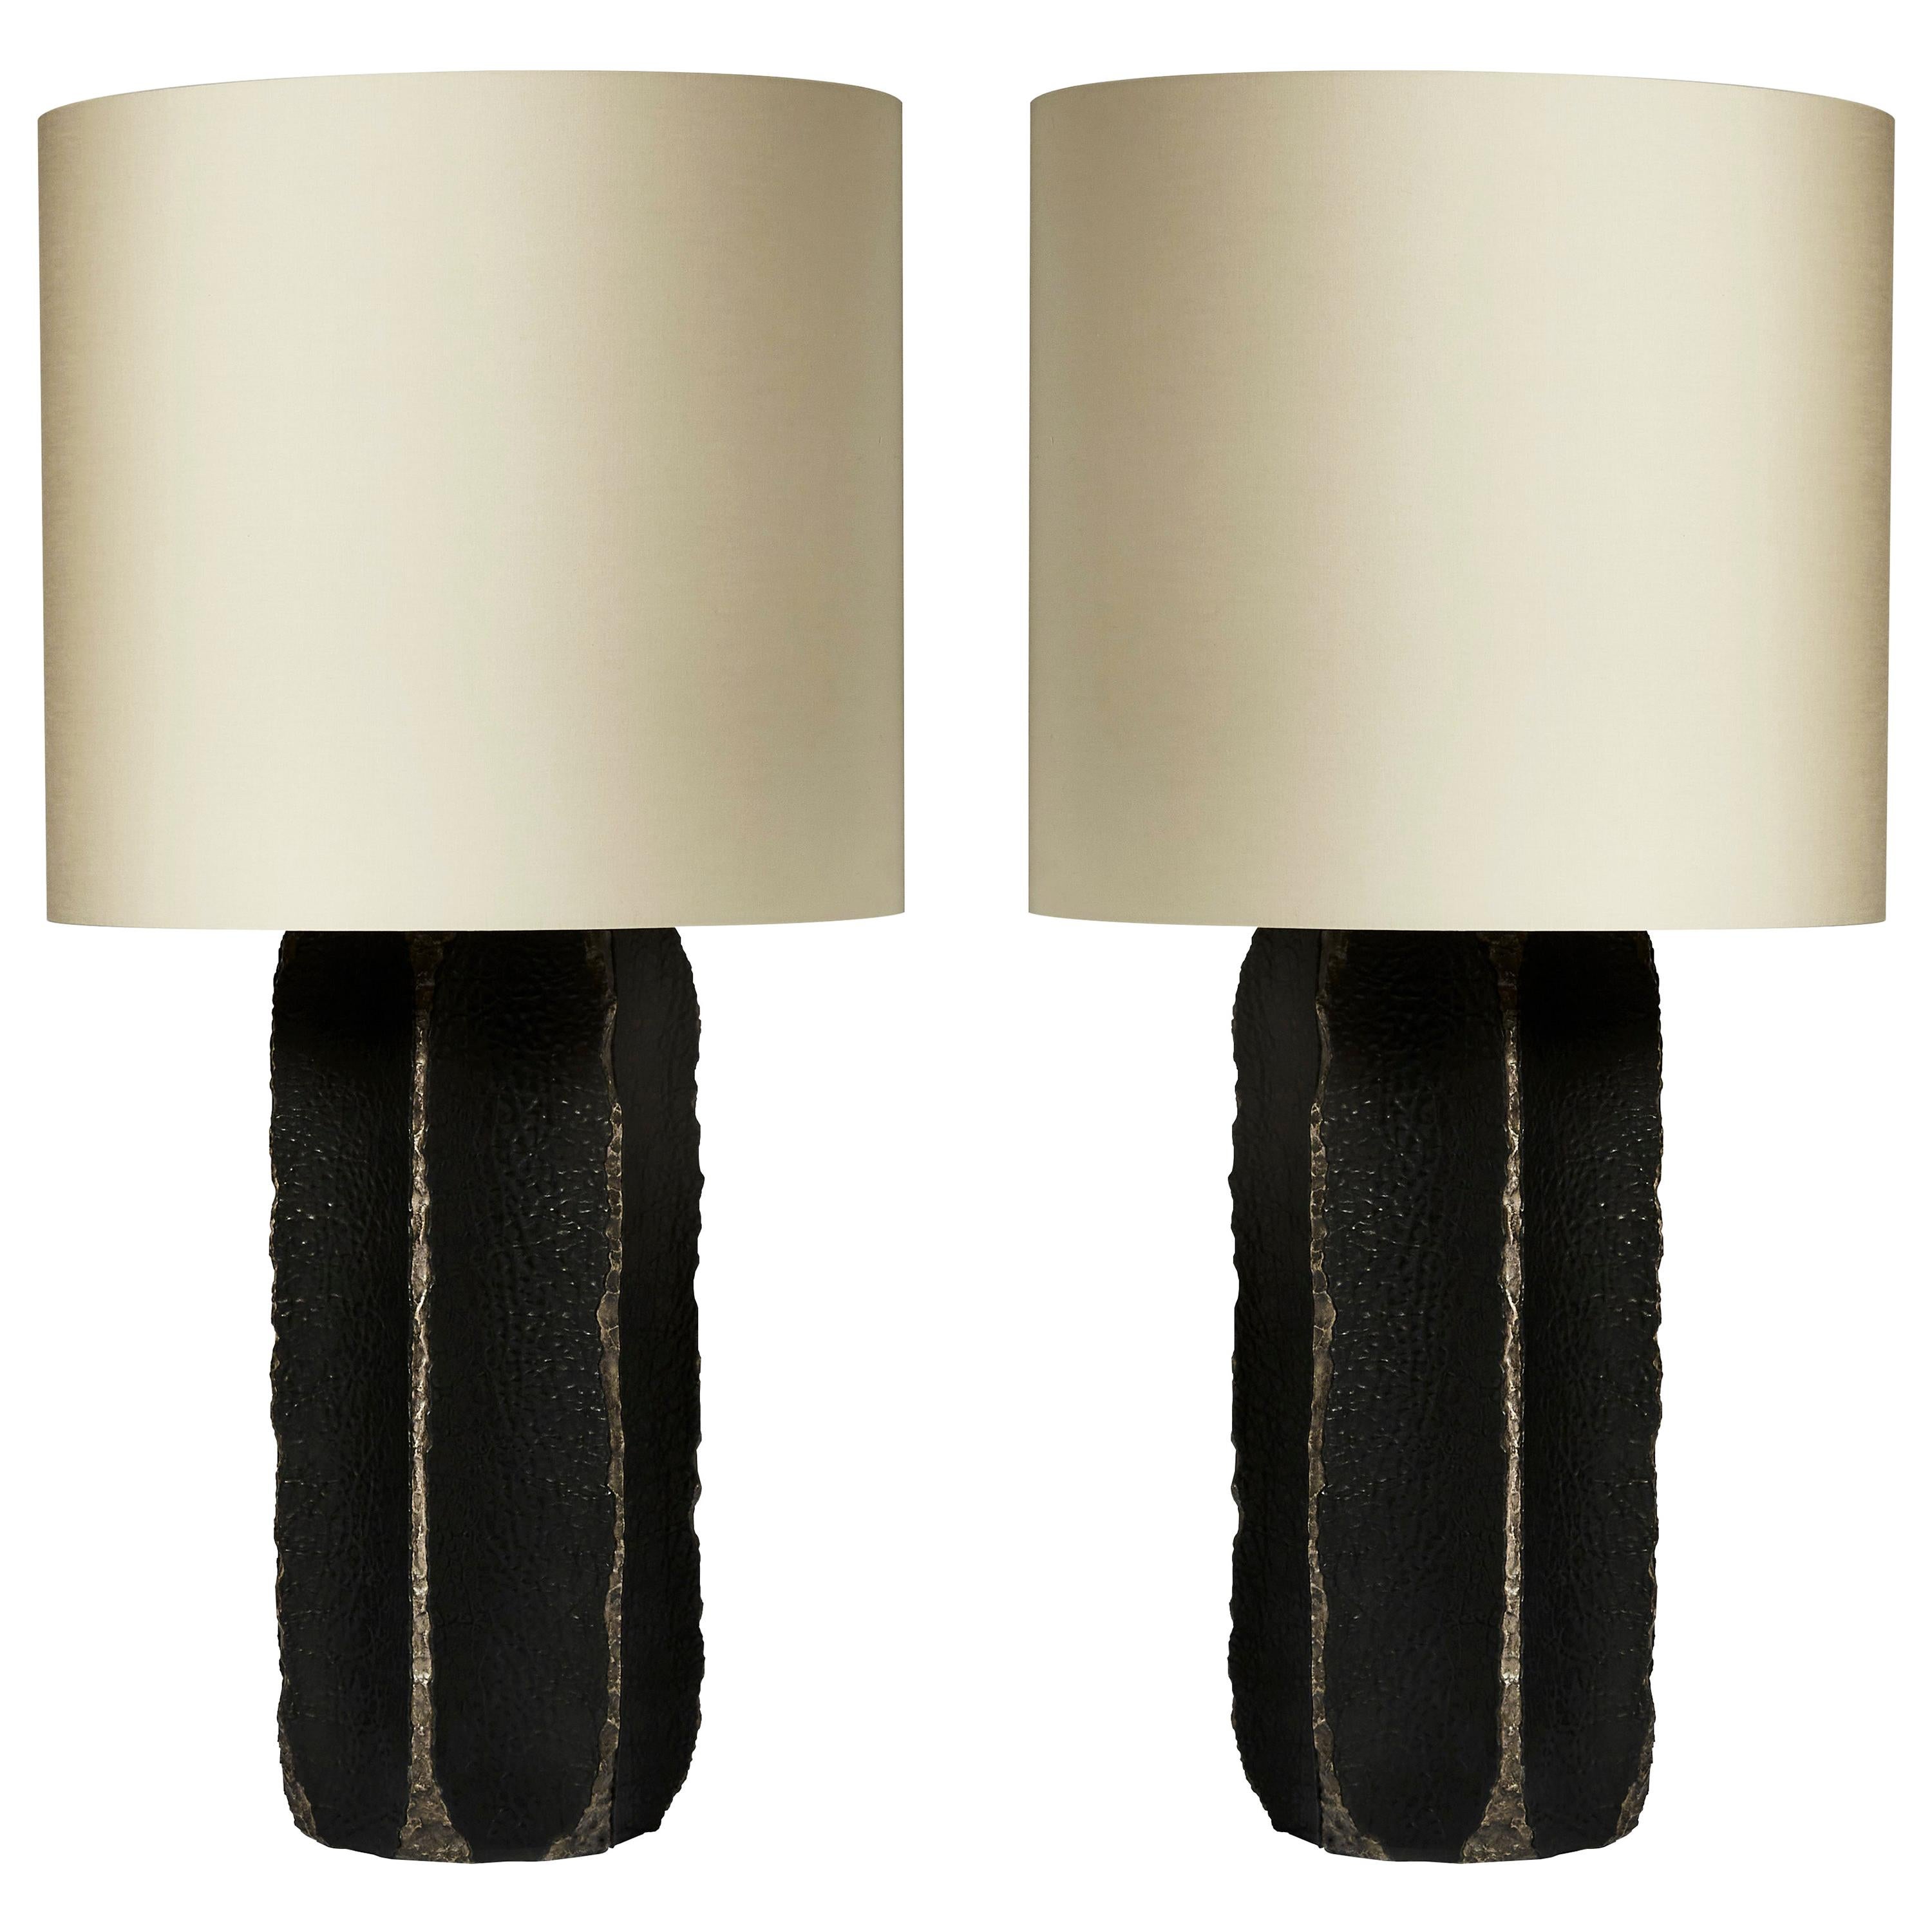 Pair of Black Ceramic and Leather Table Lamps